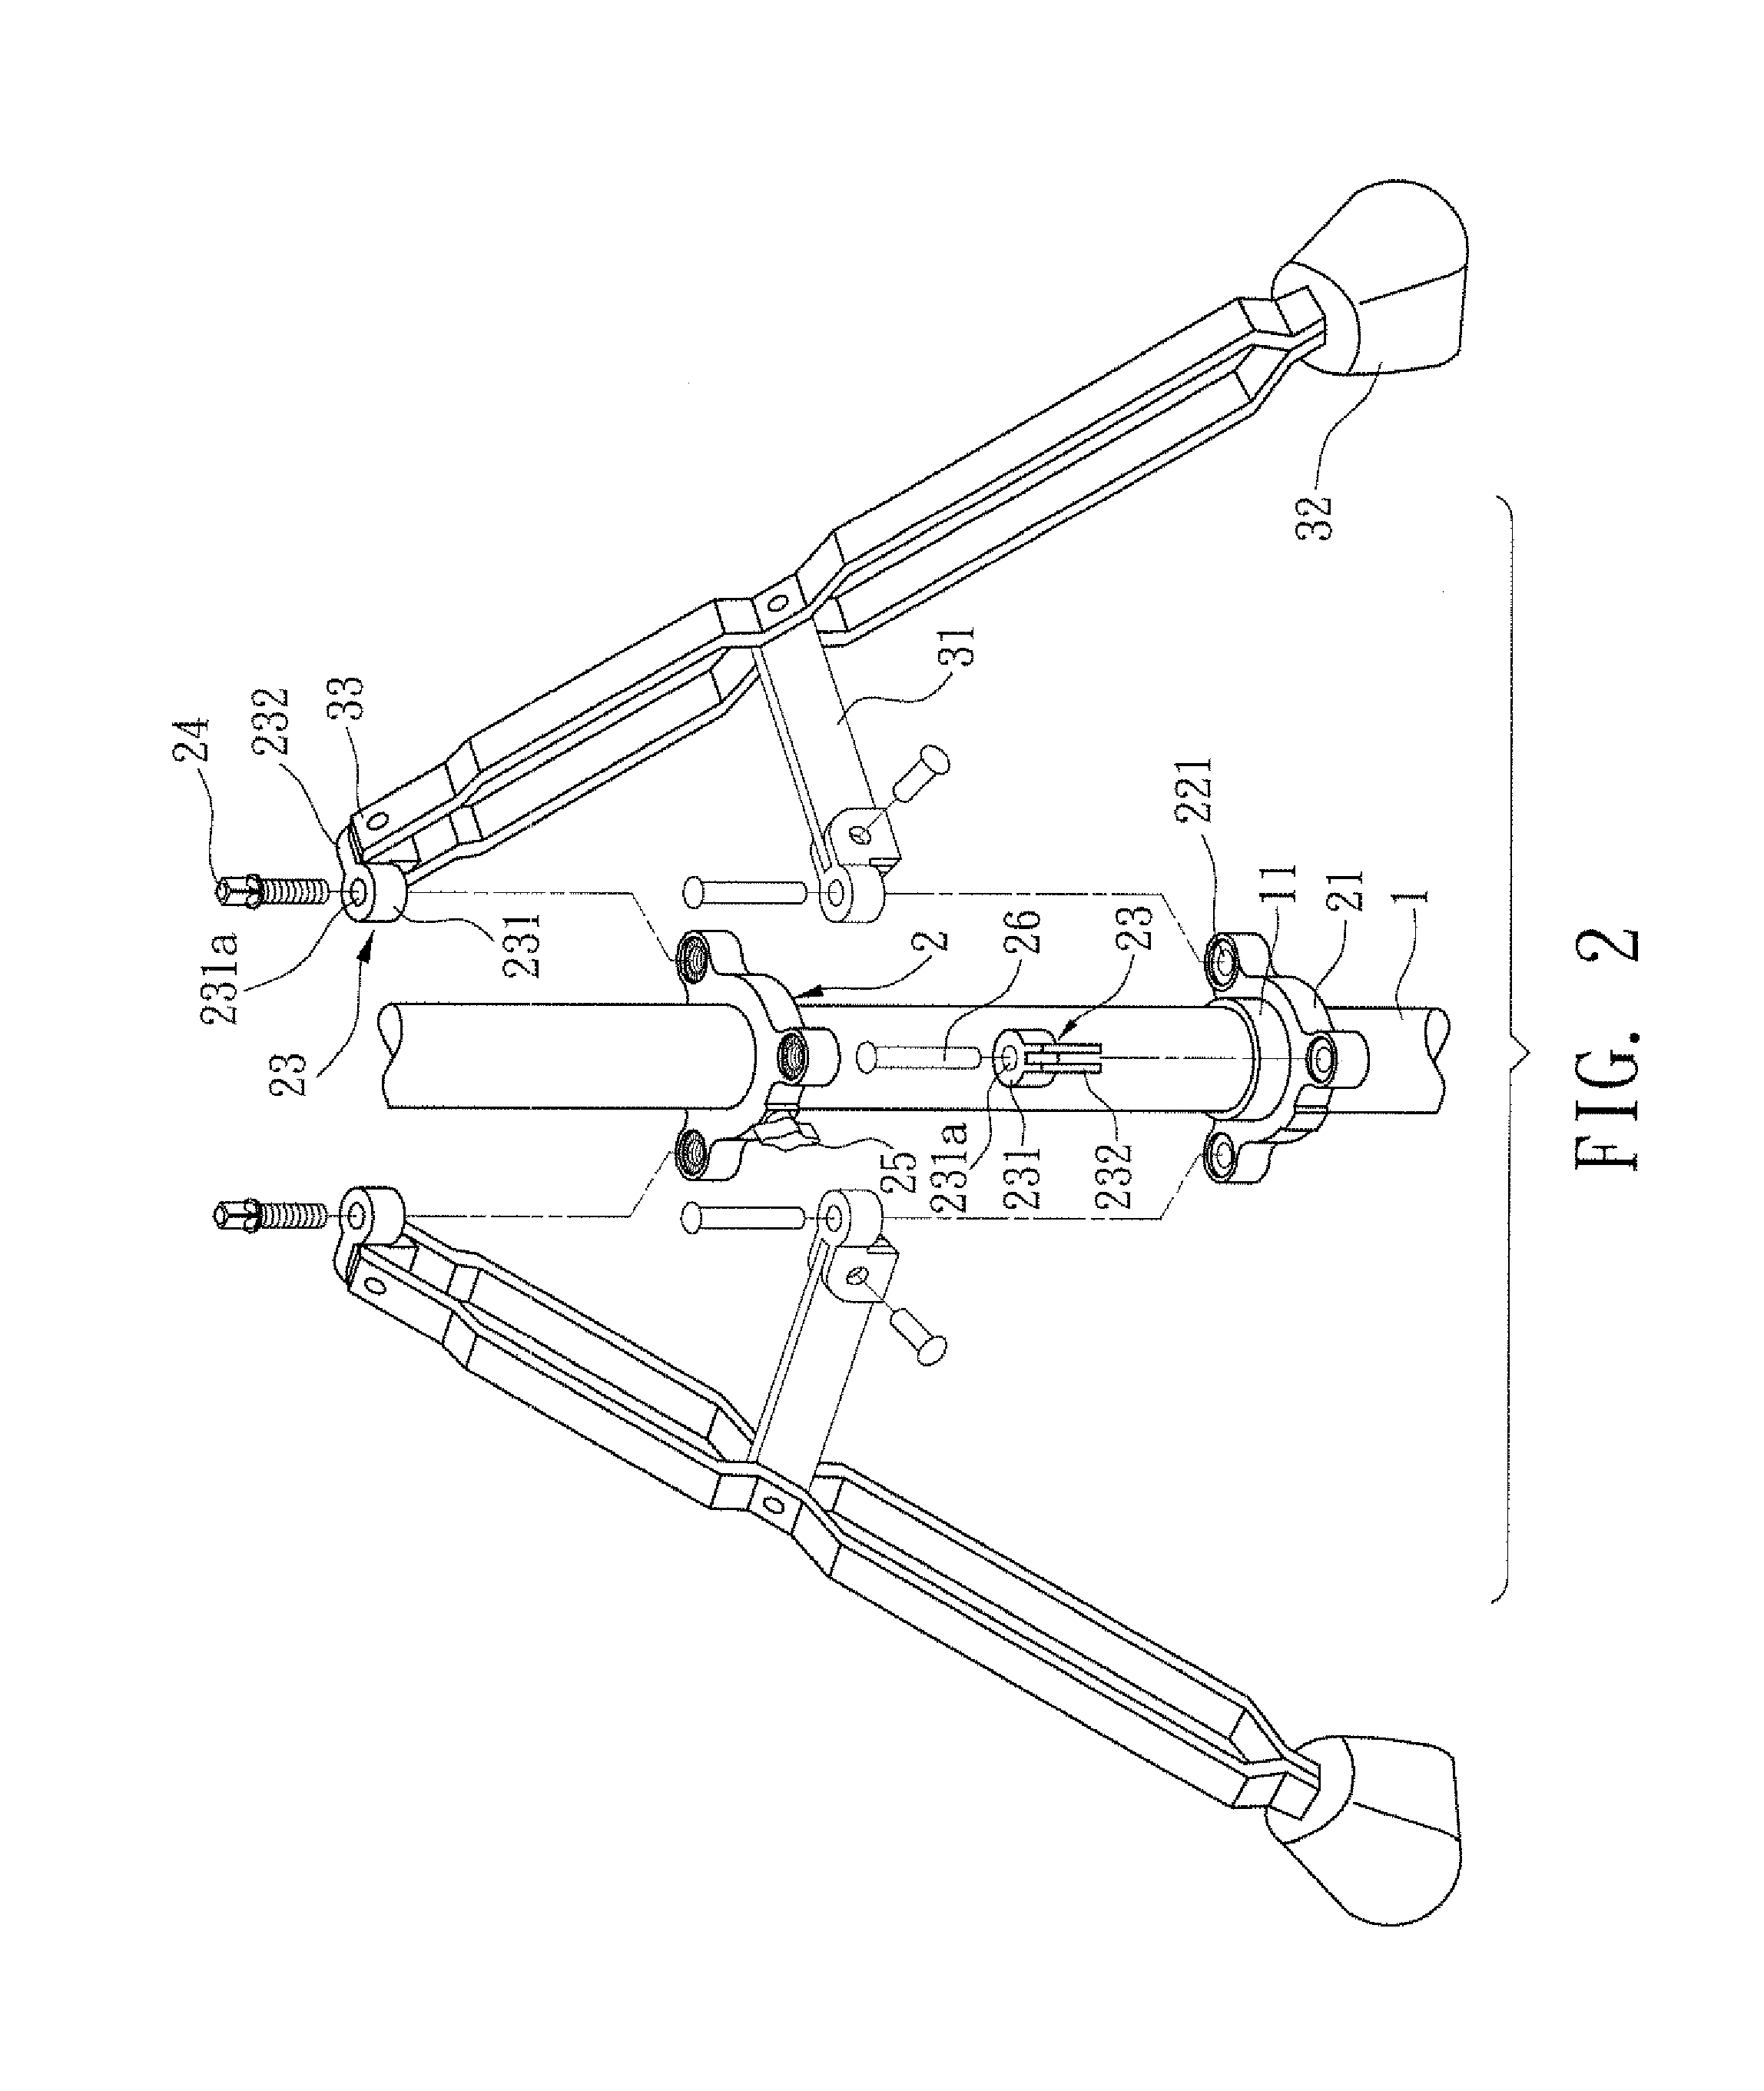 Instrument stand with variable supporting positions